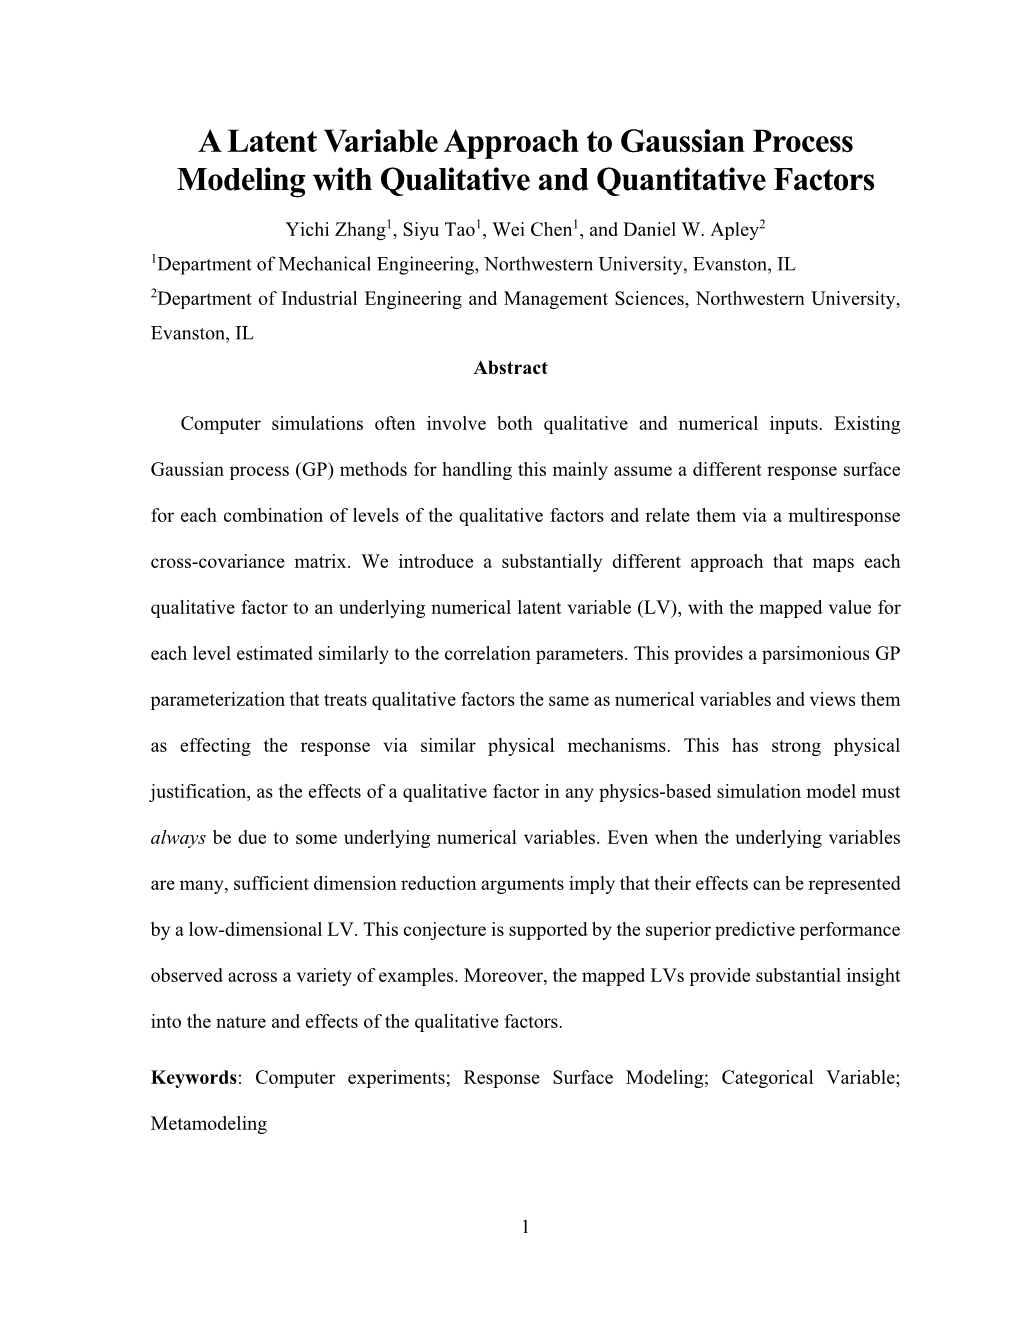 A Latent Variable Approach to Gaussian Process Modeling with Qualitative and Quantitative Factors Yichi Zhang1, Siyu Tao1, Wei Chen1, and Daniel W